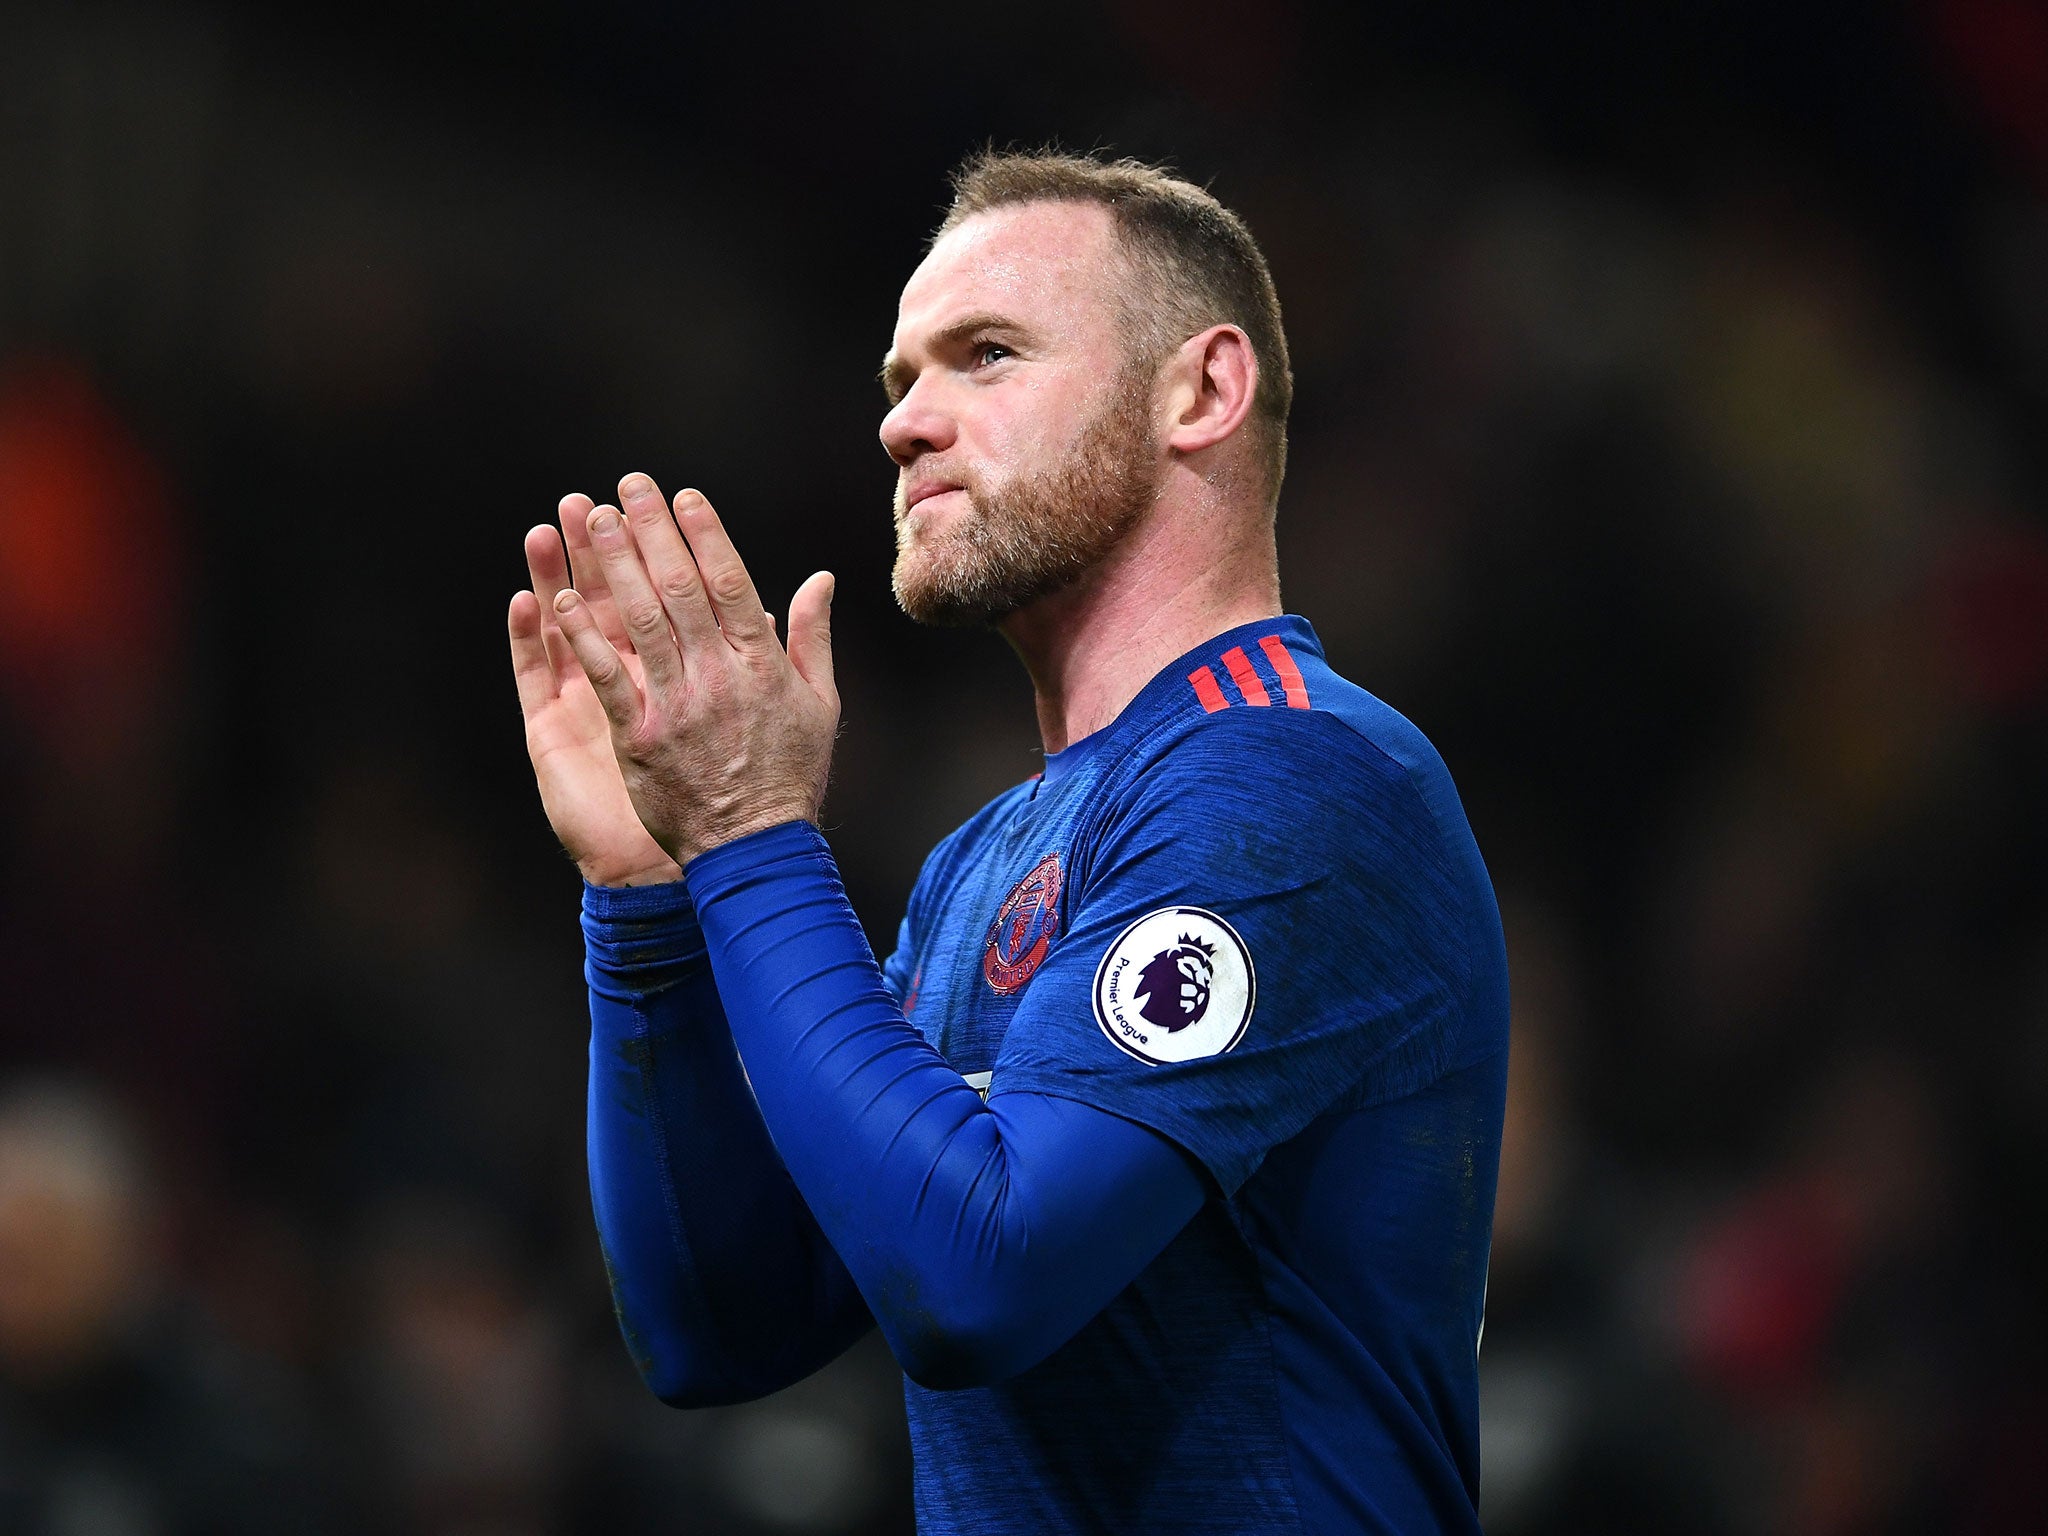 Wayne Rooney, now Manchester United's all-time top goalscorer, is set to depart